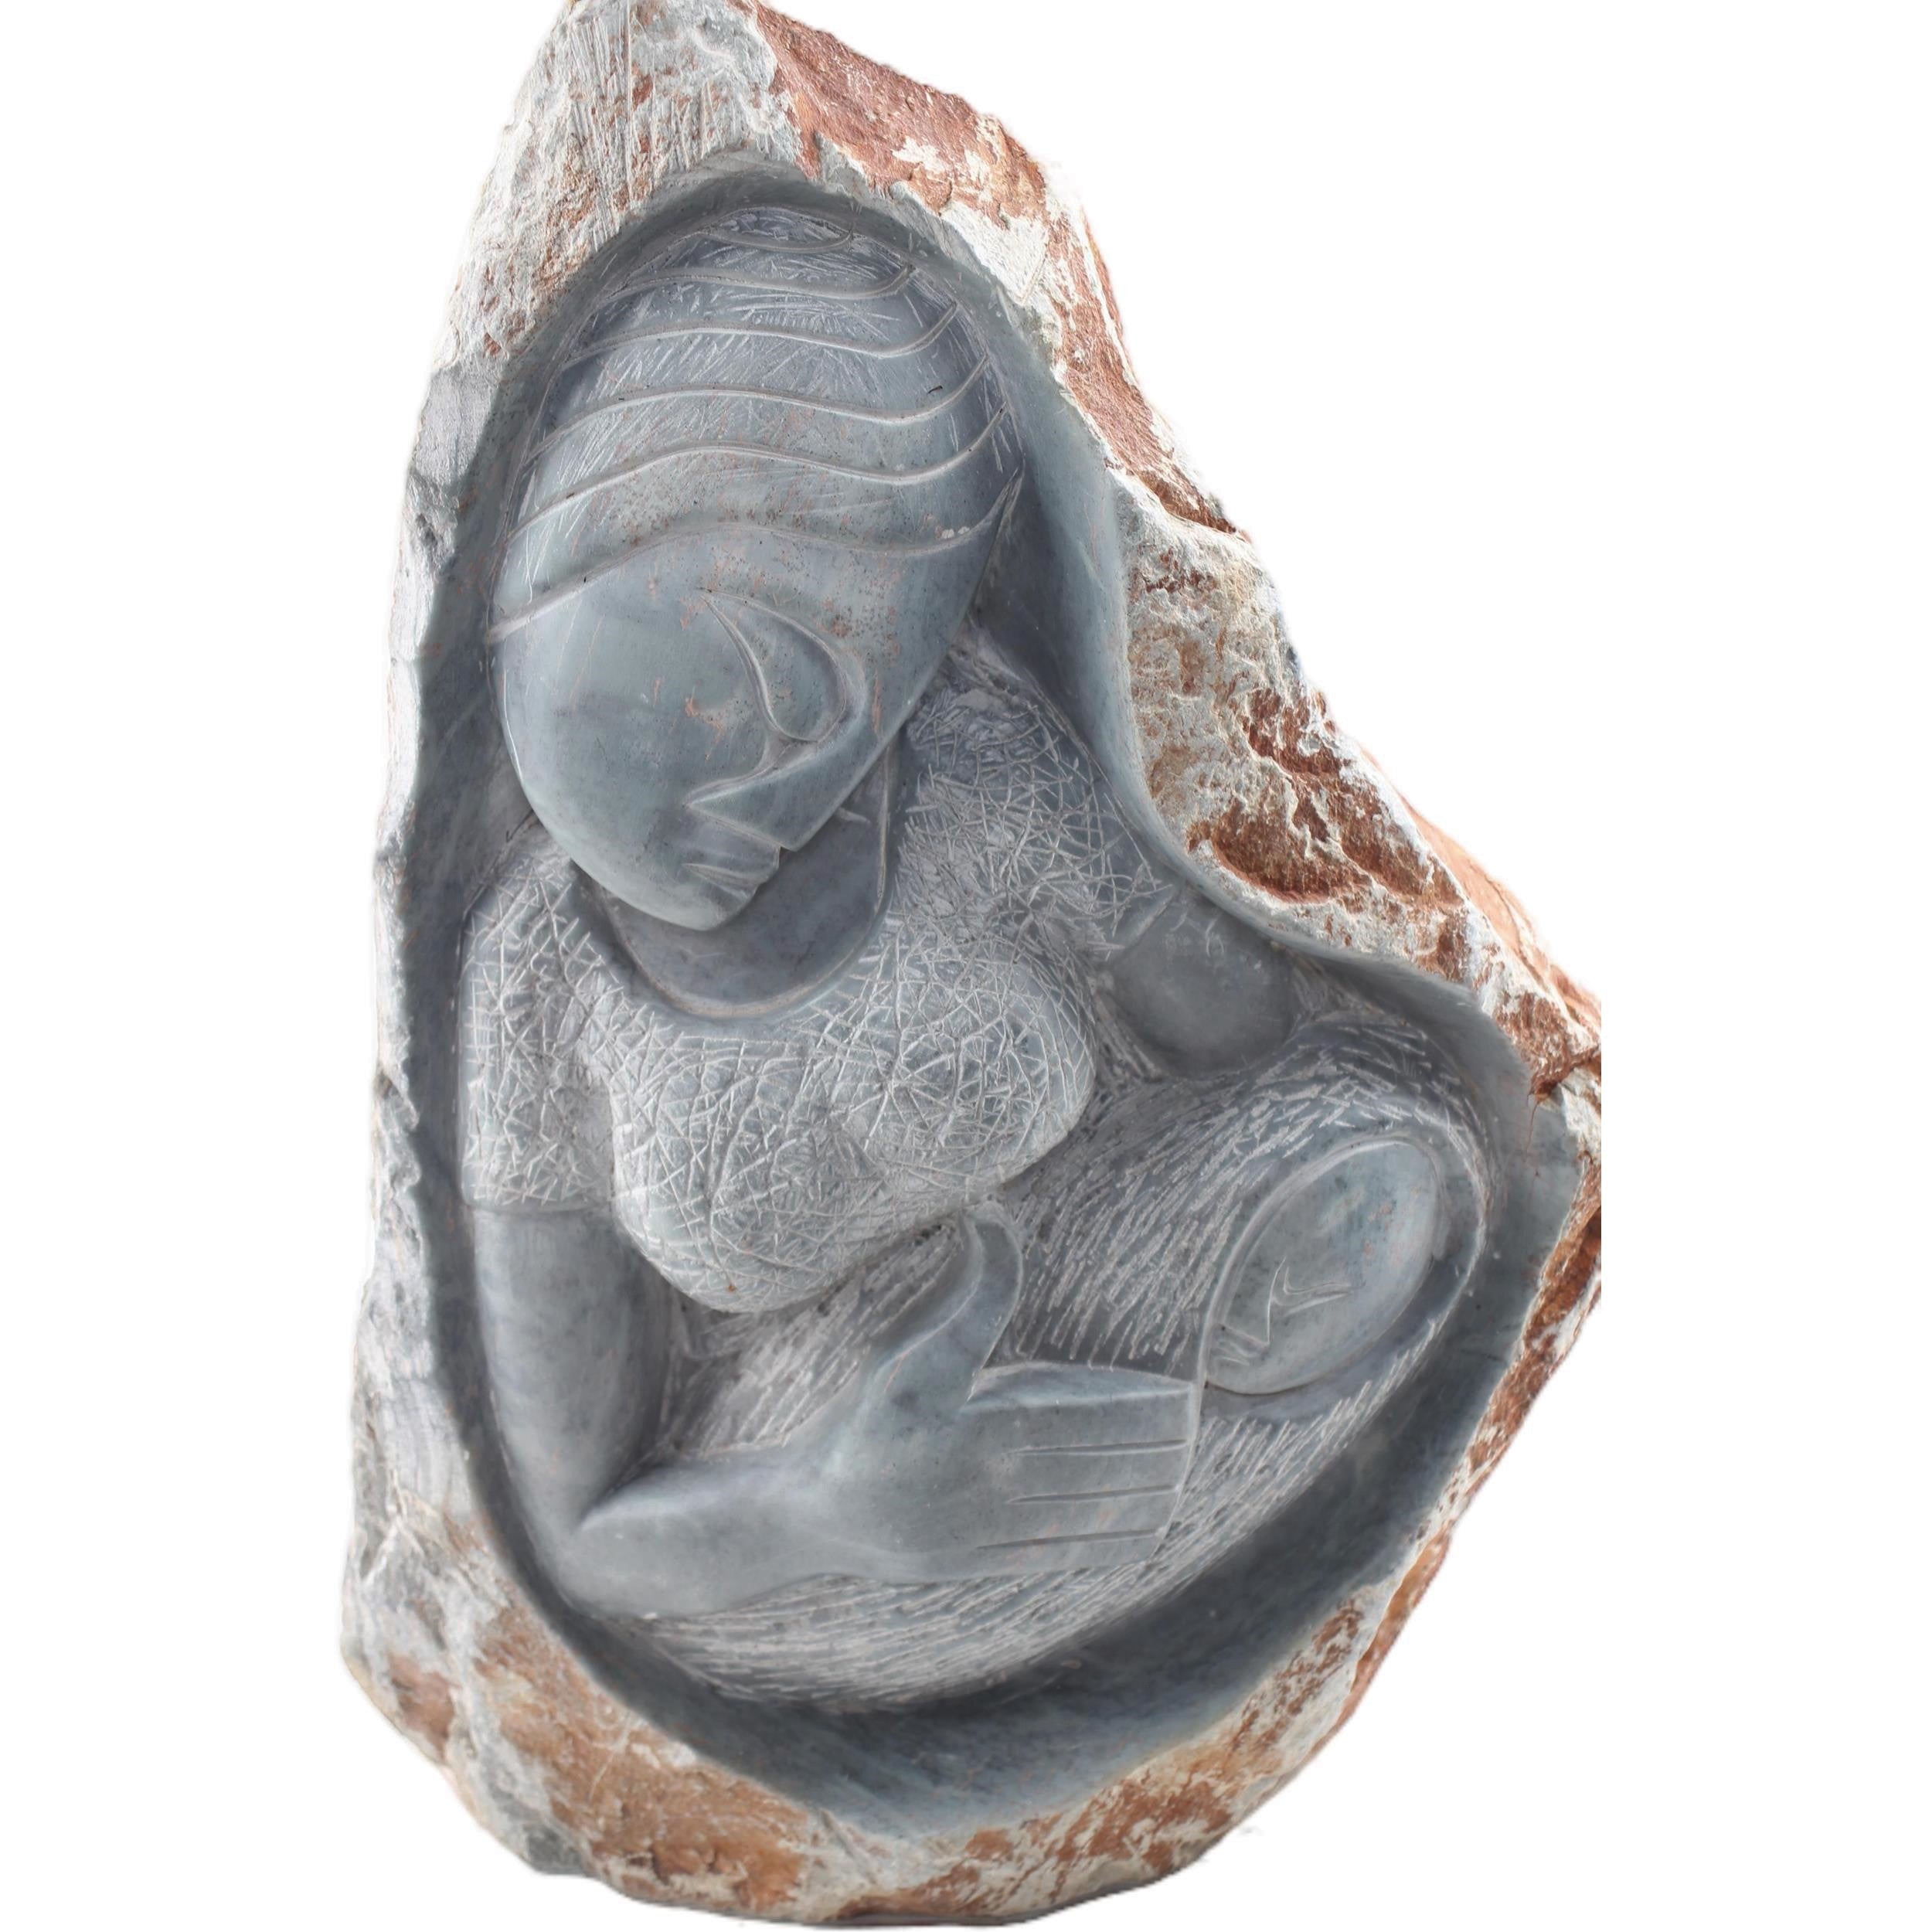 Shona Tribe Serpentine Stone Mother and Child ~16.9" Tall